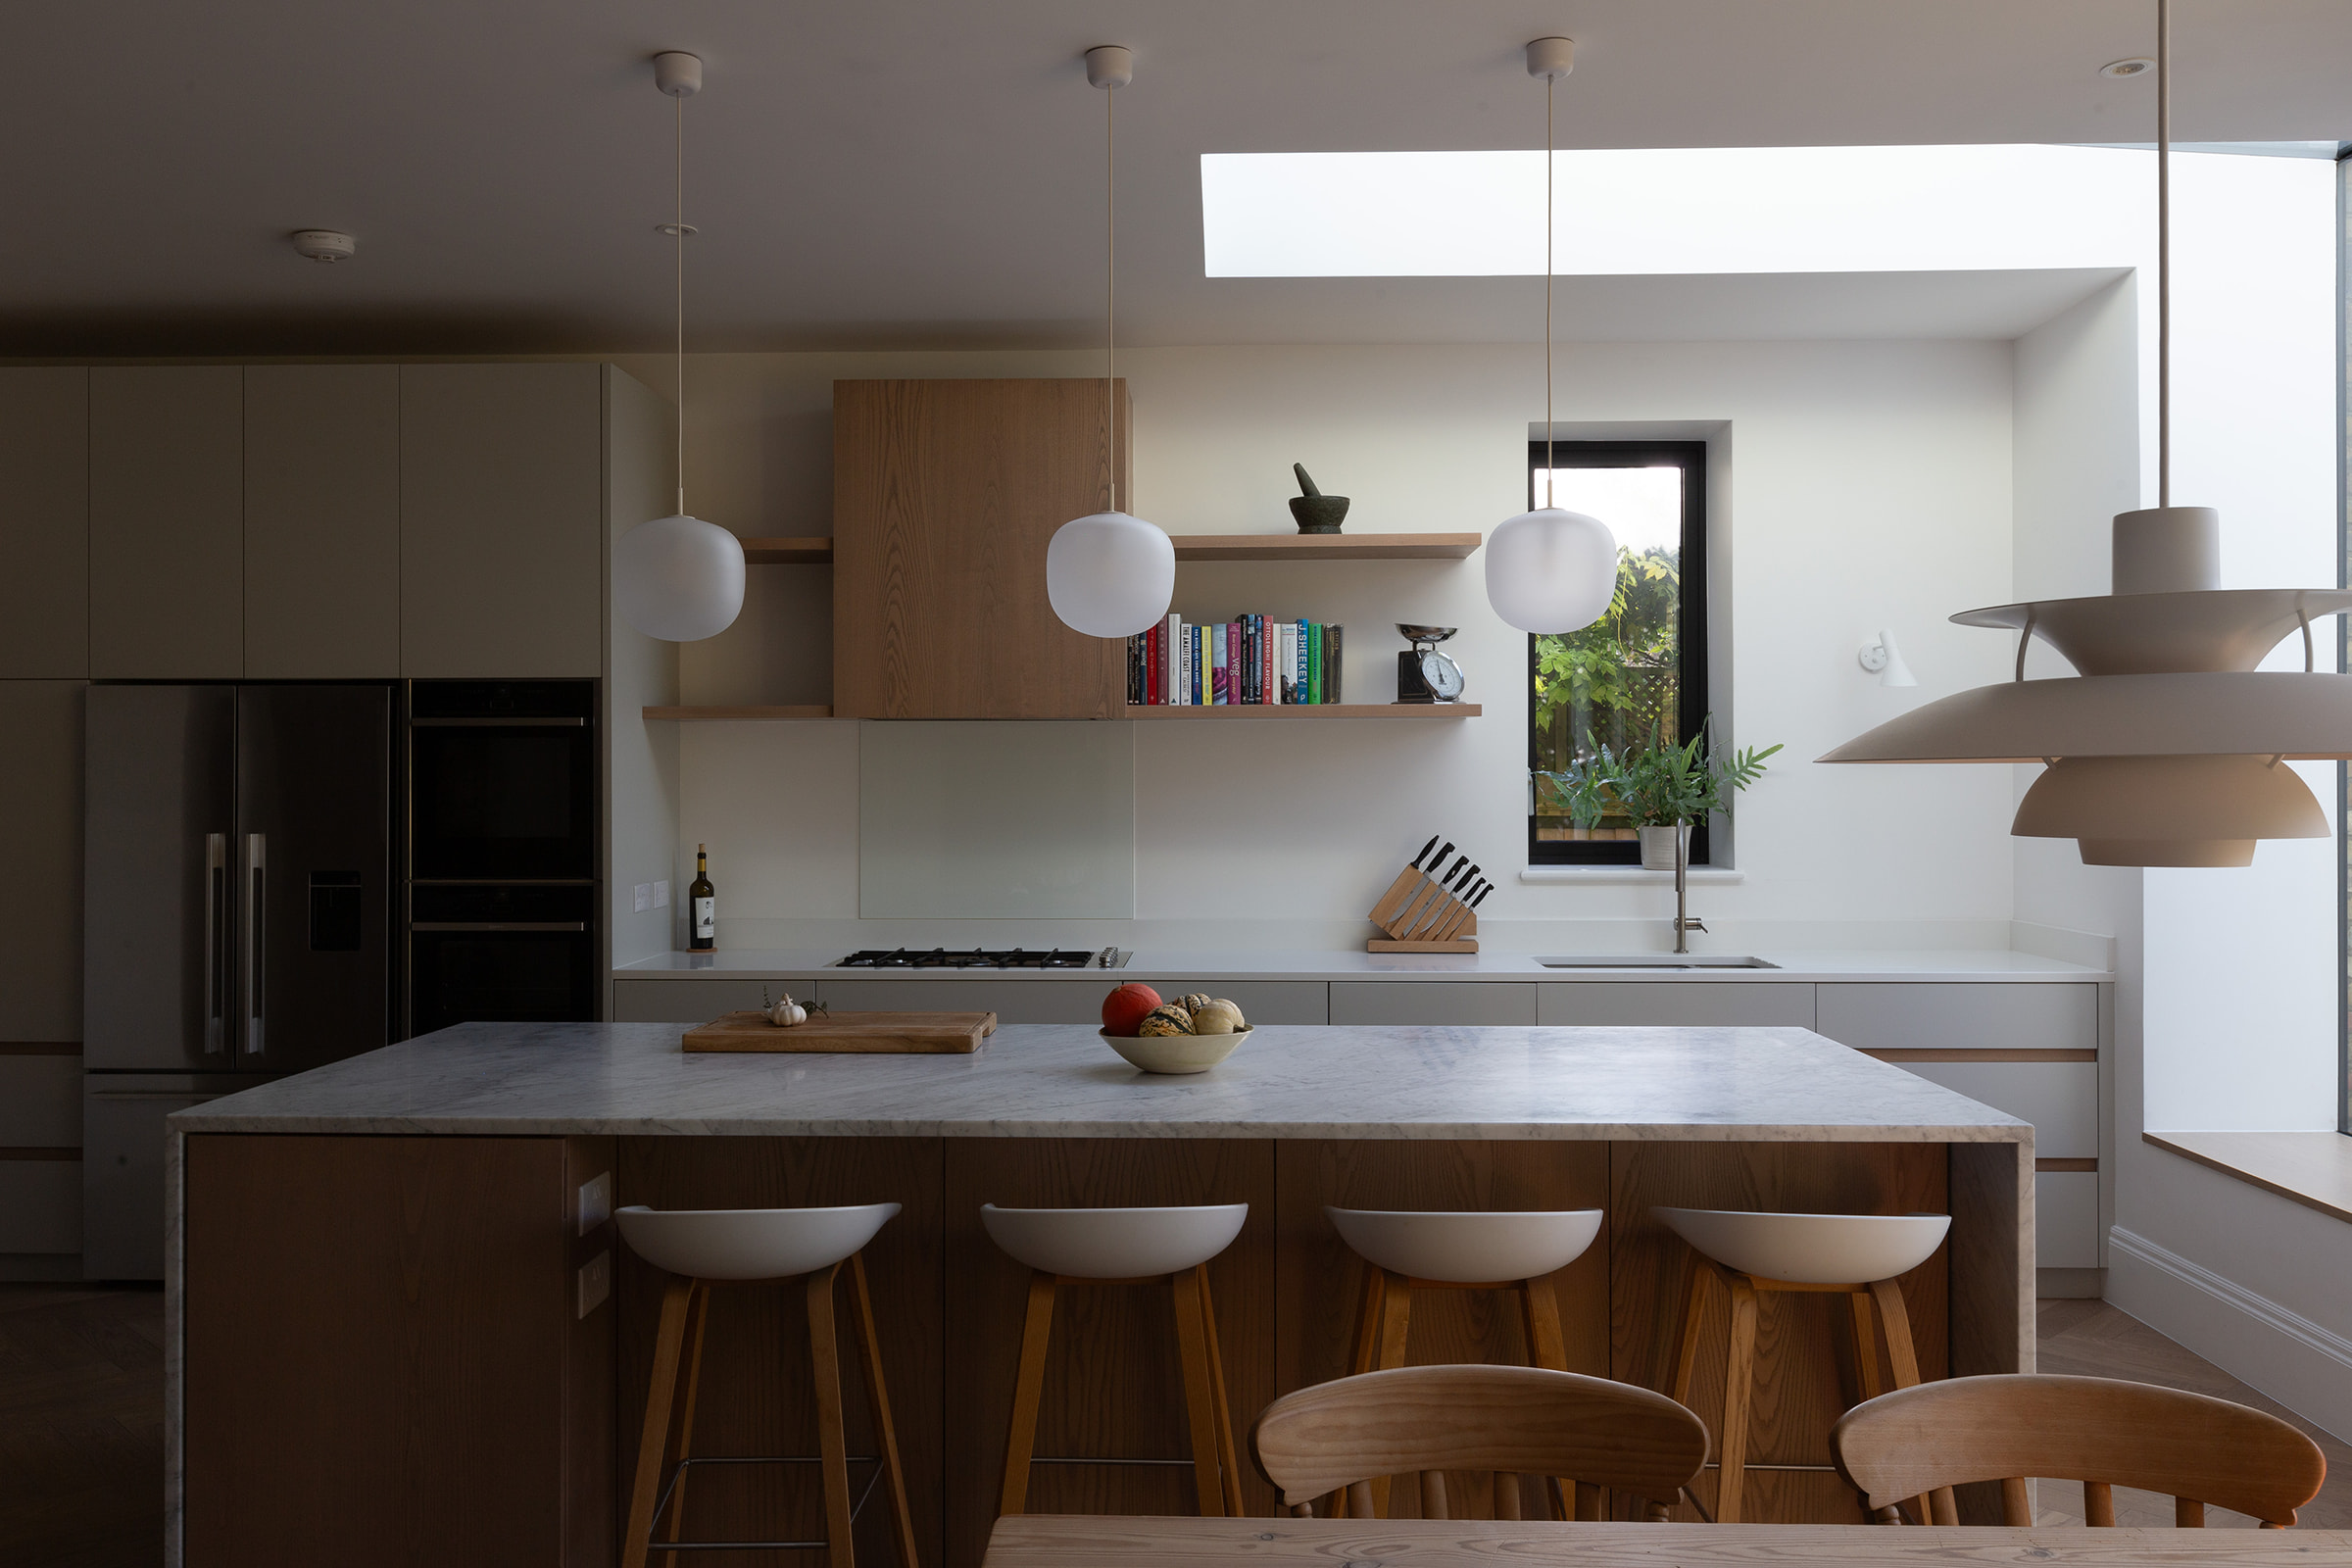 life style photograph of a modern kitchen bathed in natural light.